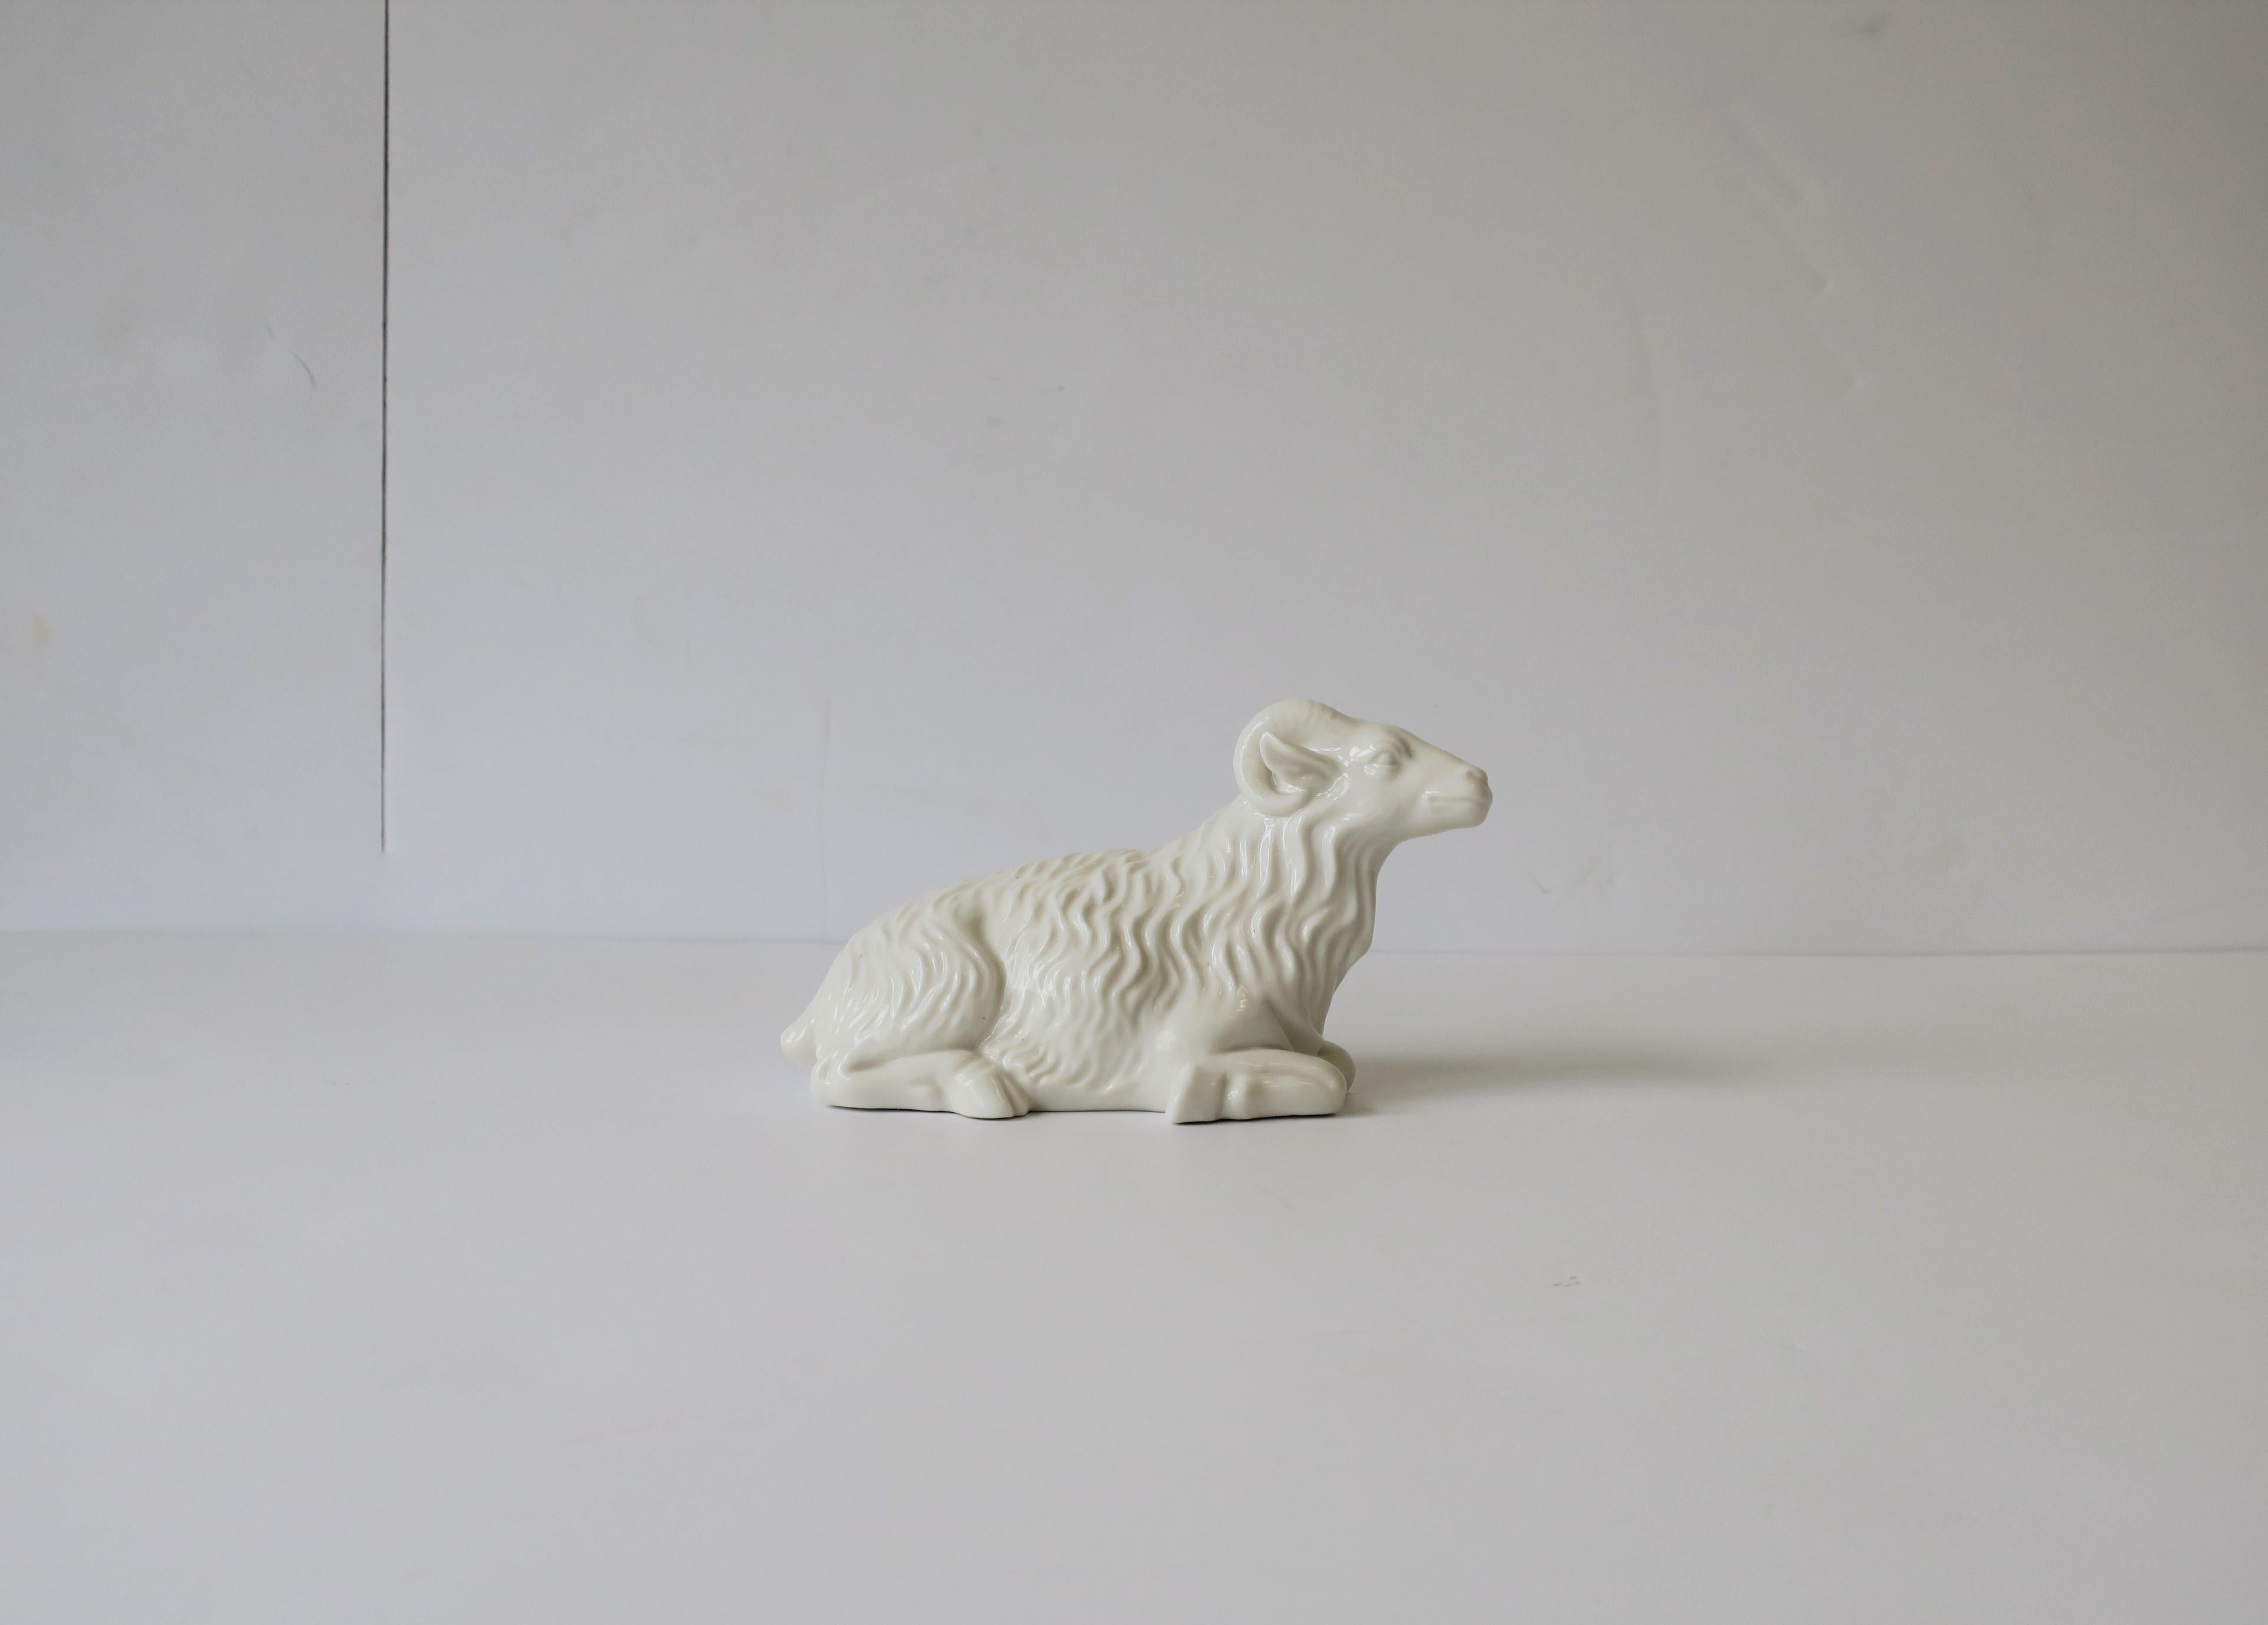 A great Hollywood Regency style white porcelain animal ram sculpture piece. Ram has fine details including its horns, face, hoofs, and coat, circa mid-20th century. Marked 